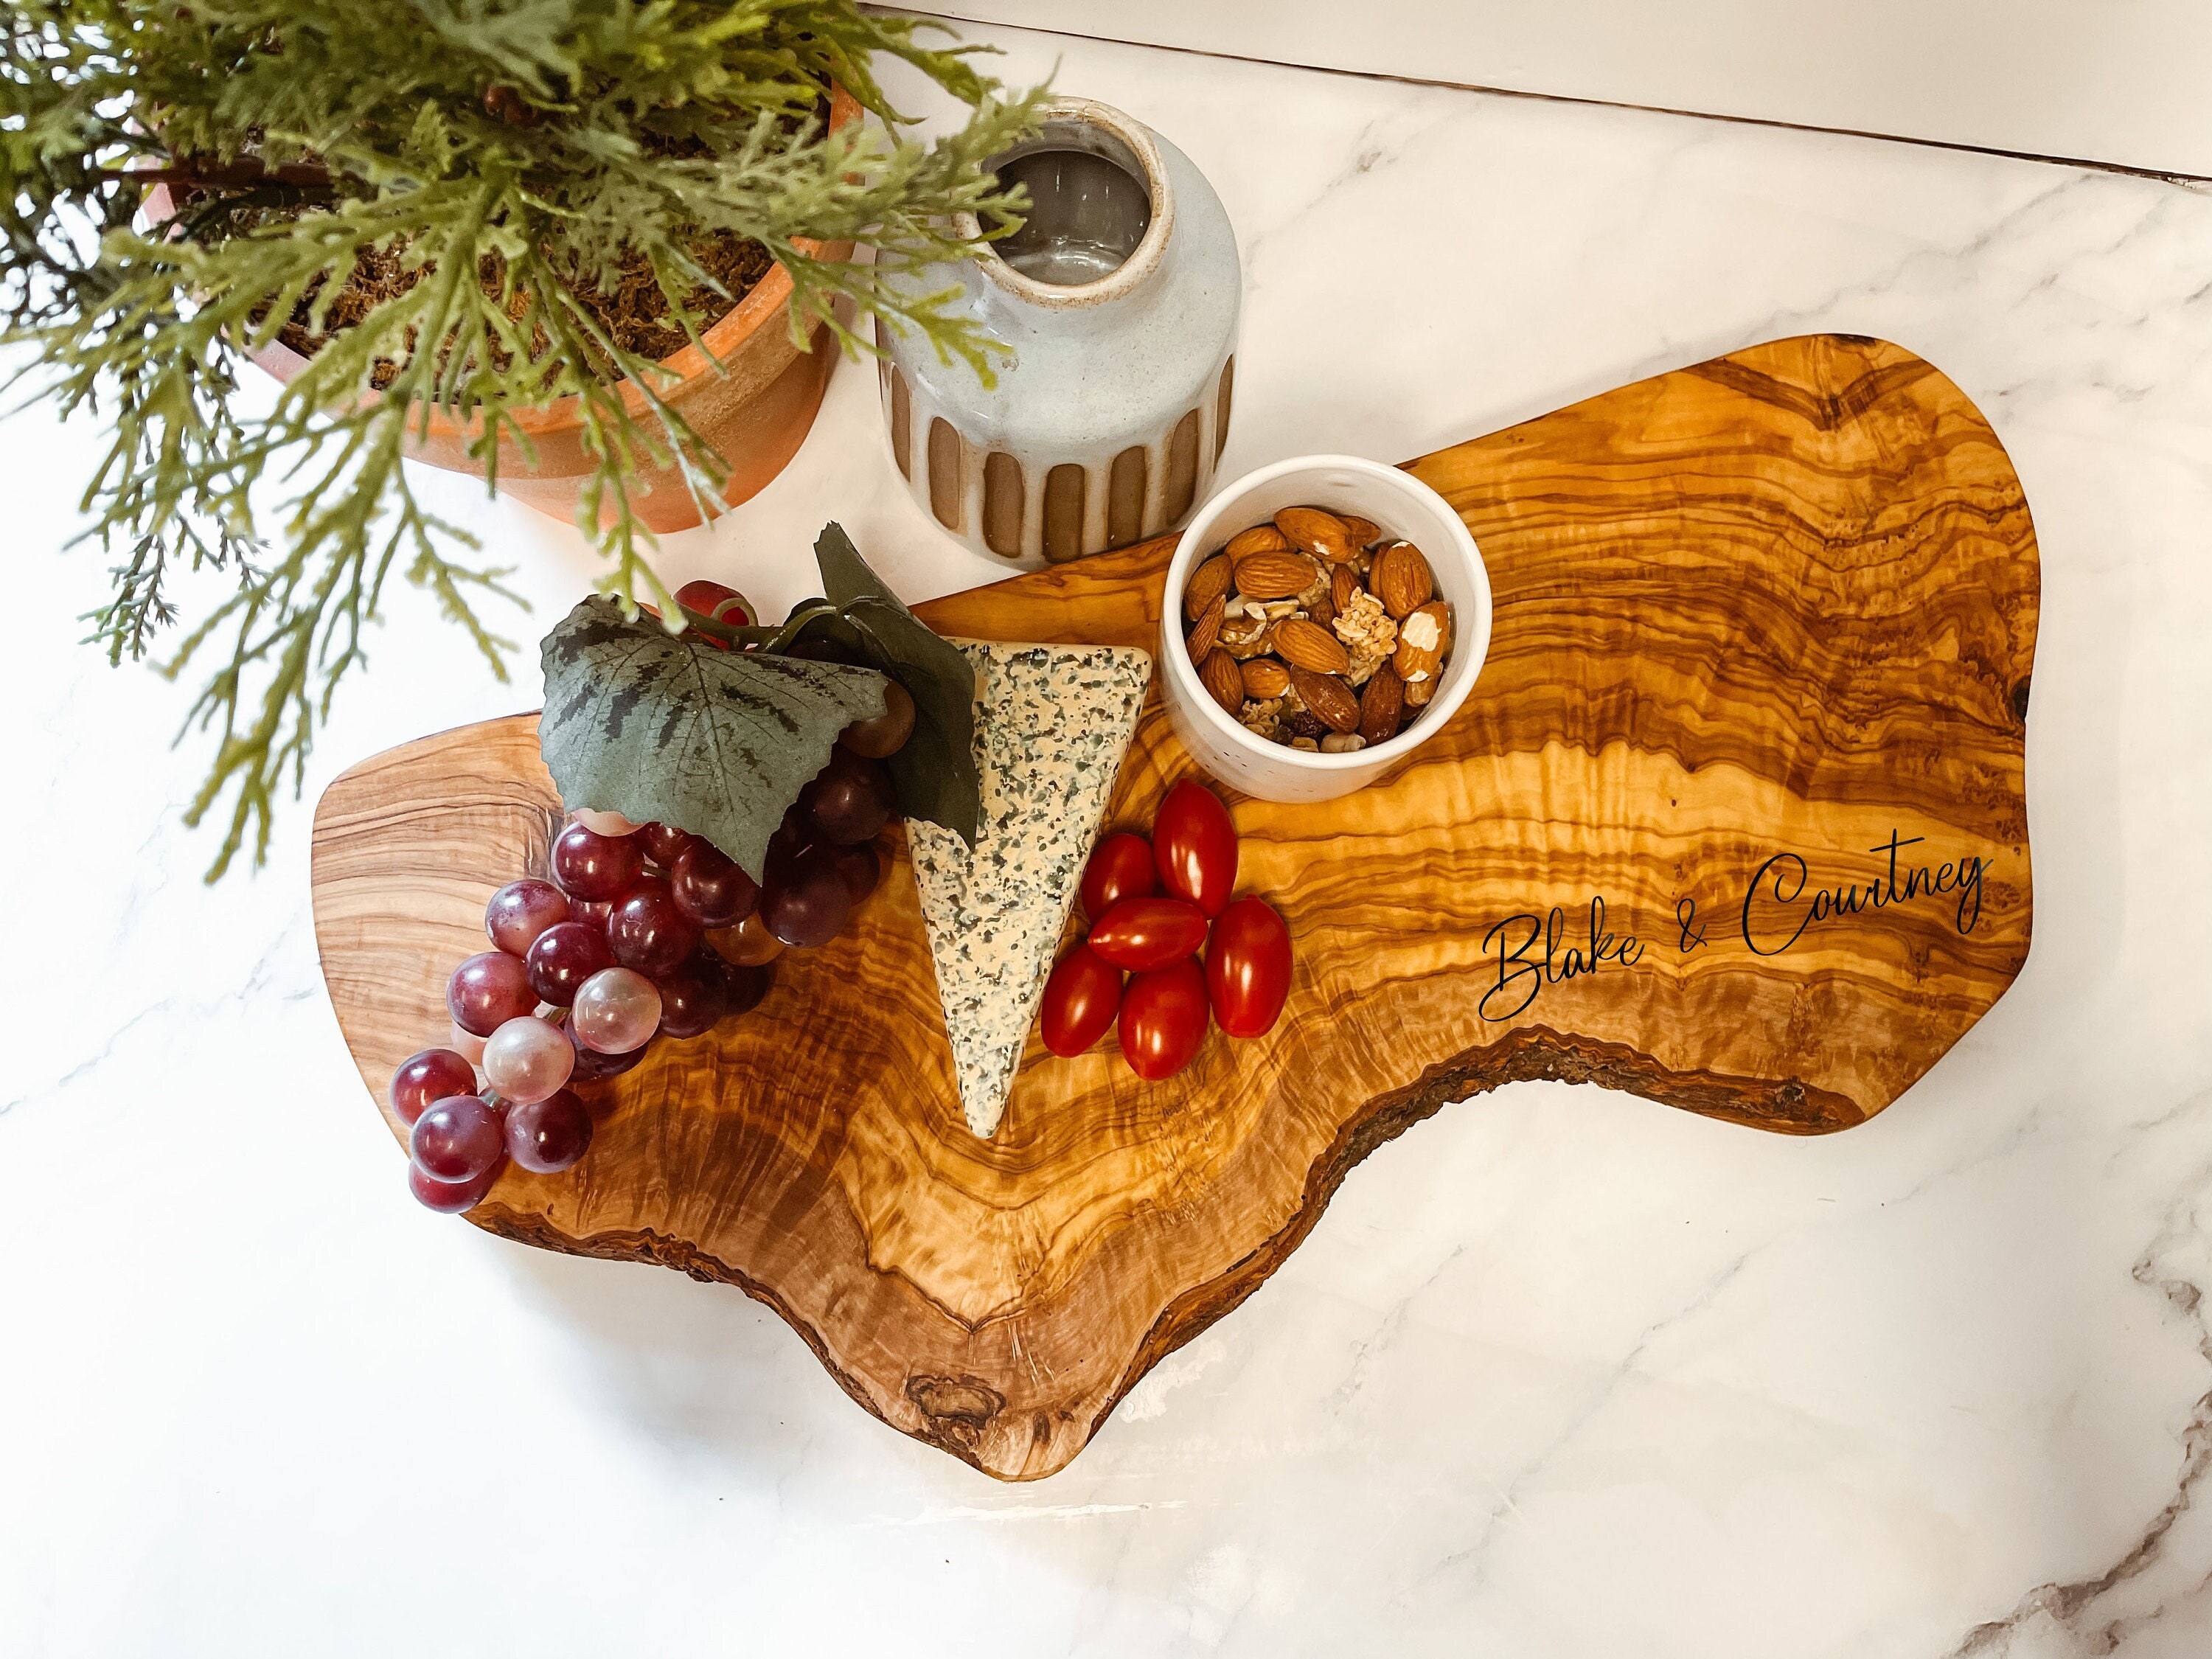 Personalized Live Edge Olive Wood Cutting Board - Forest Decor